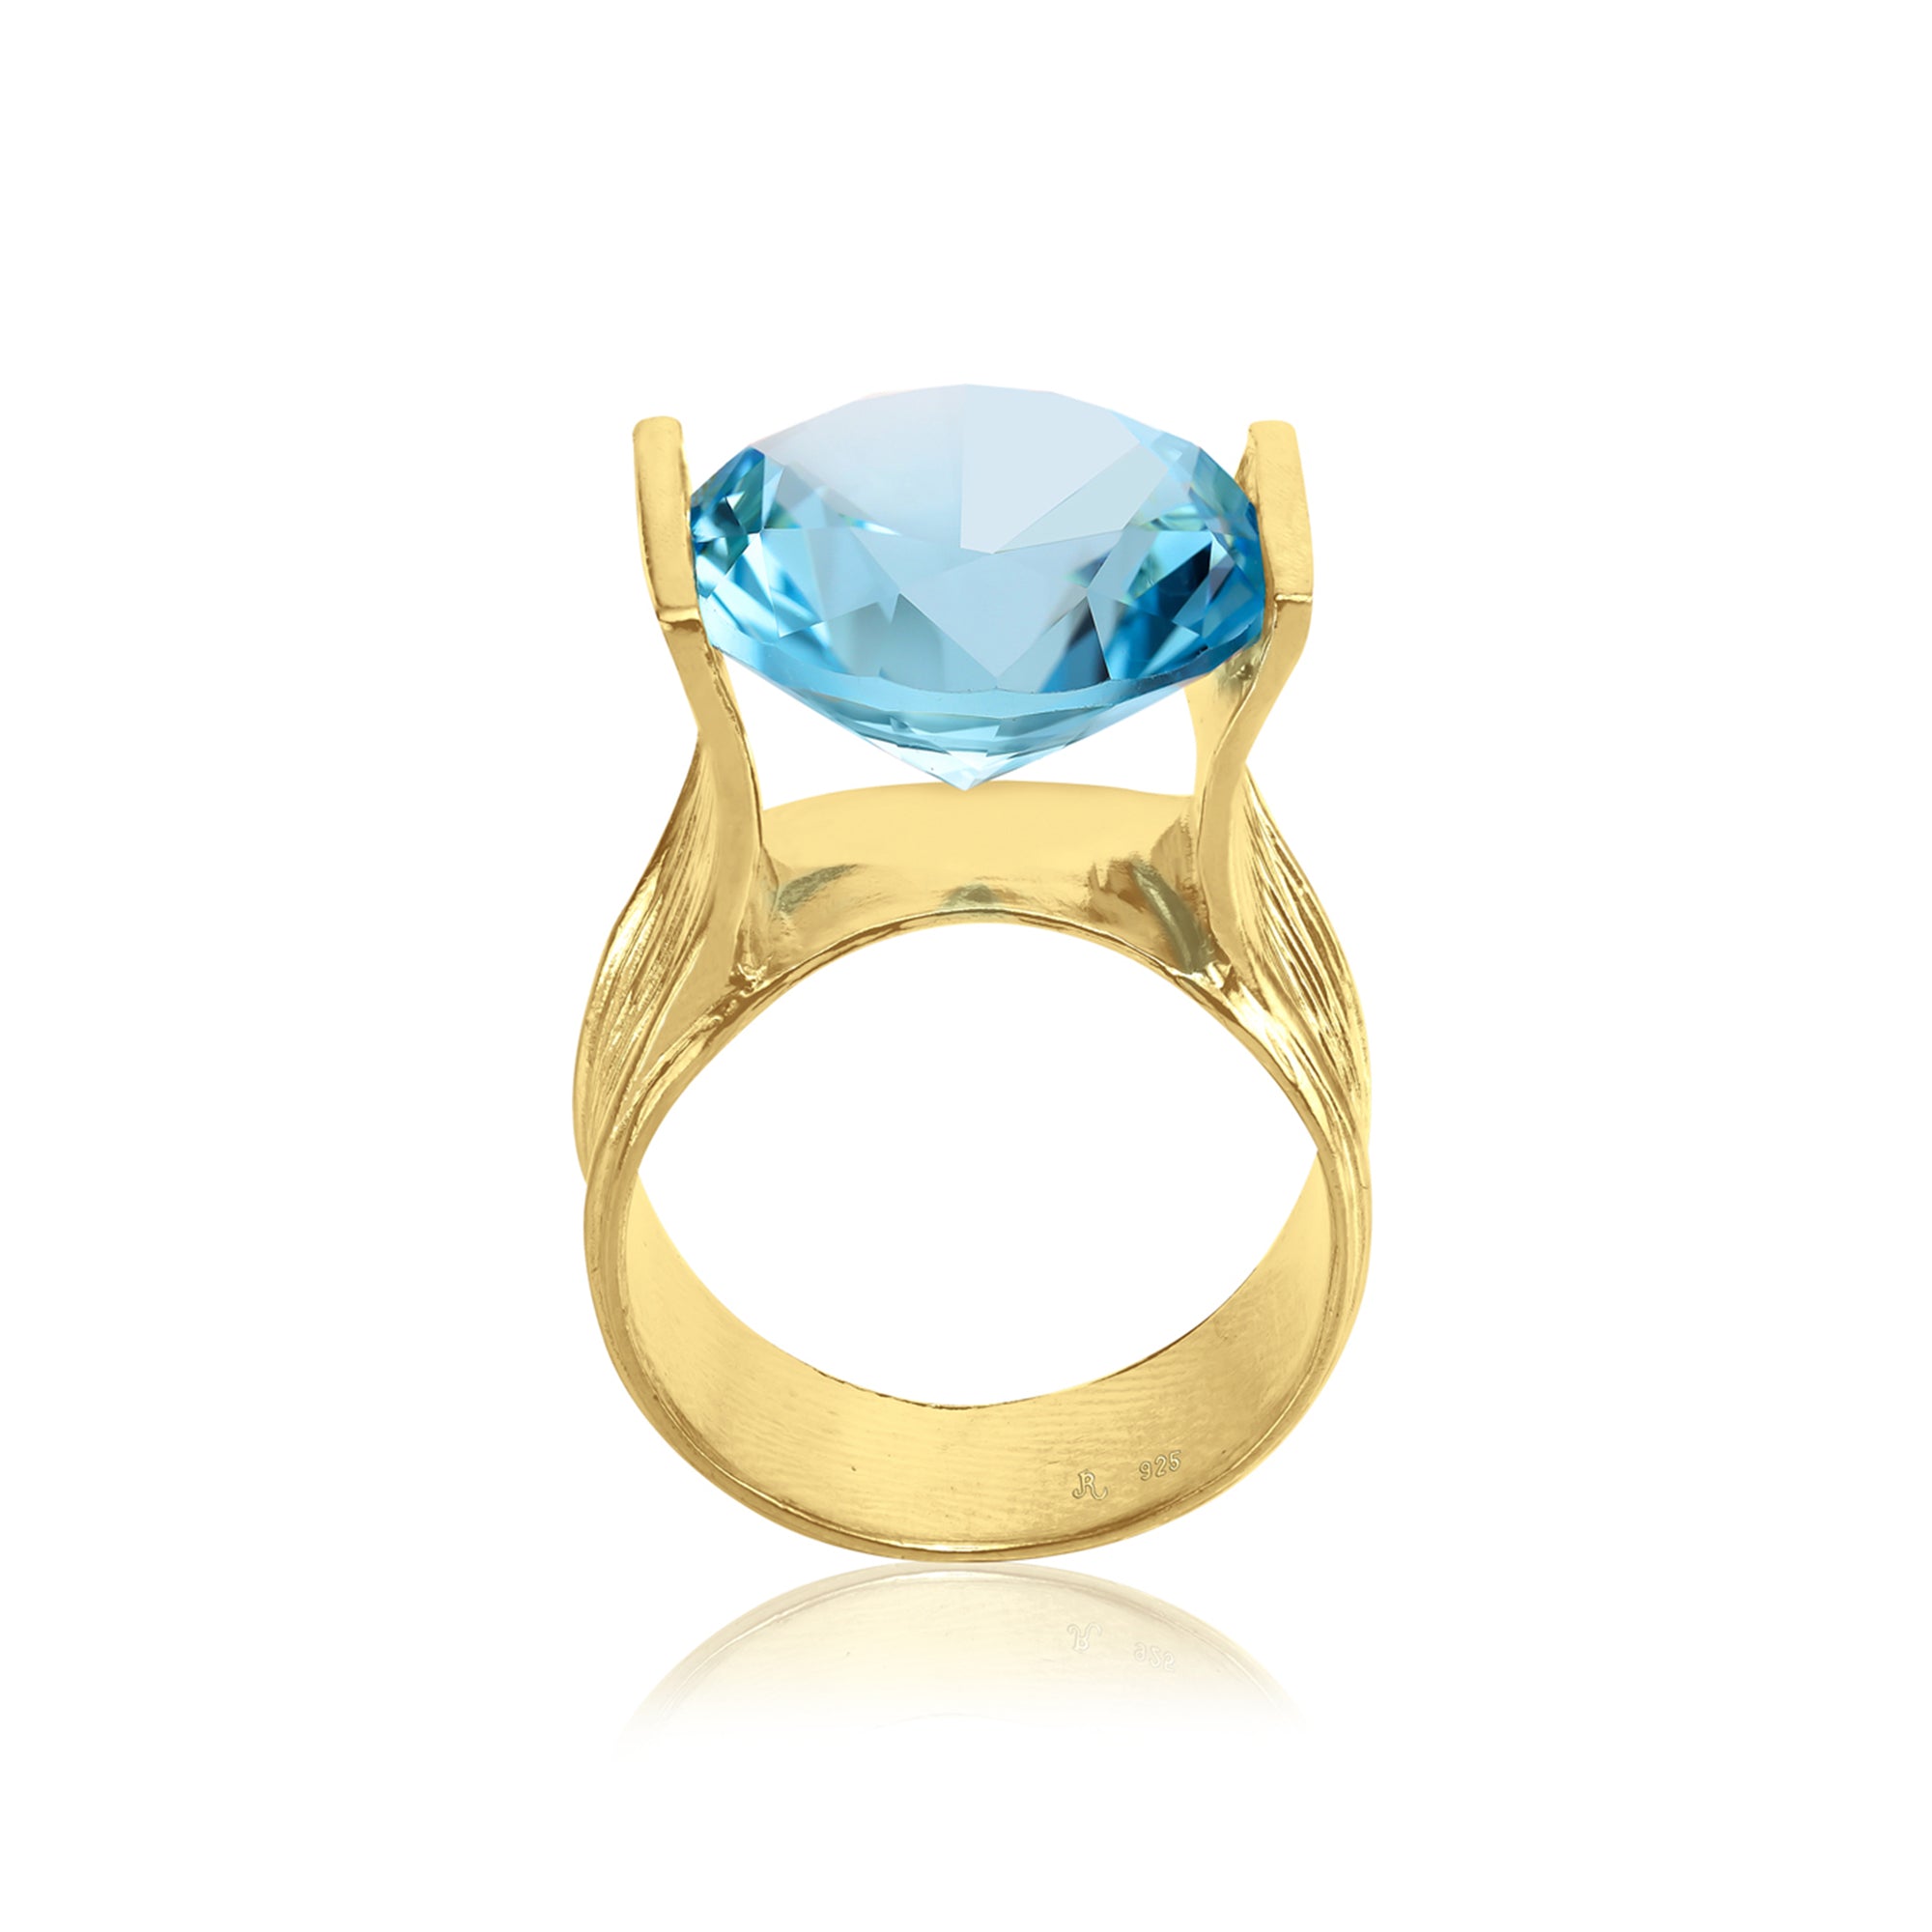 14K Gold Over Sterling Silver Aquamarine CZ Ring